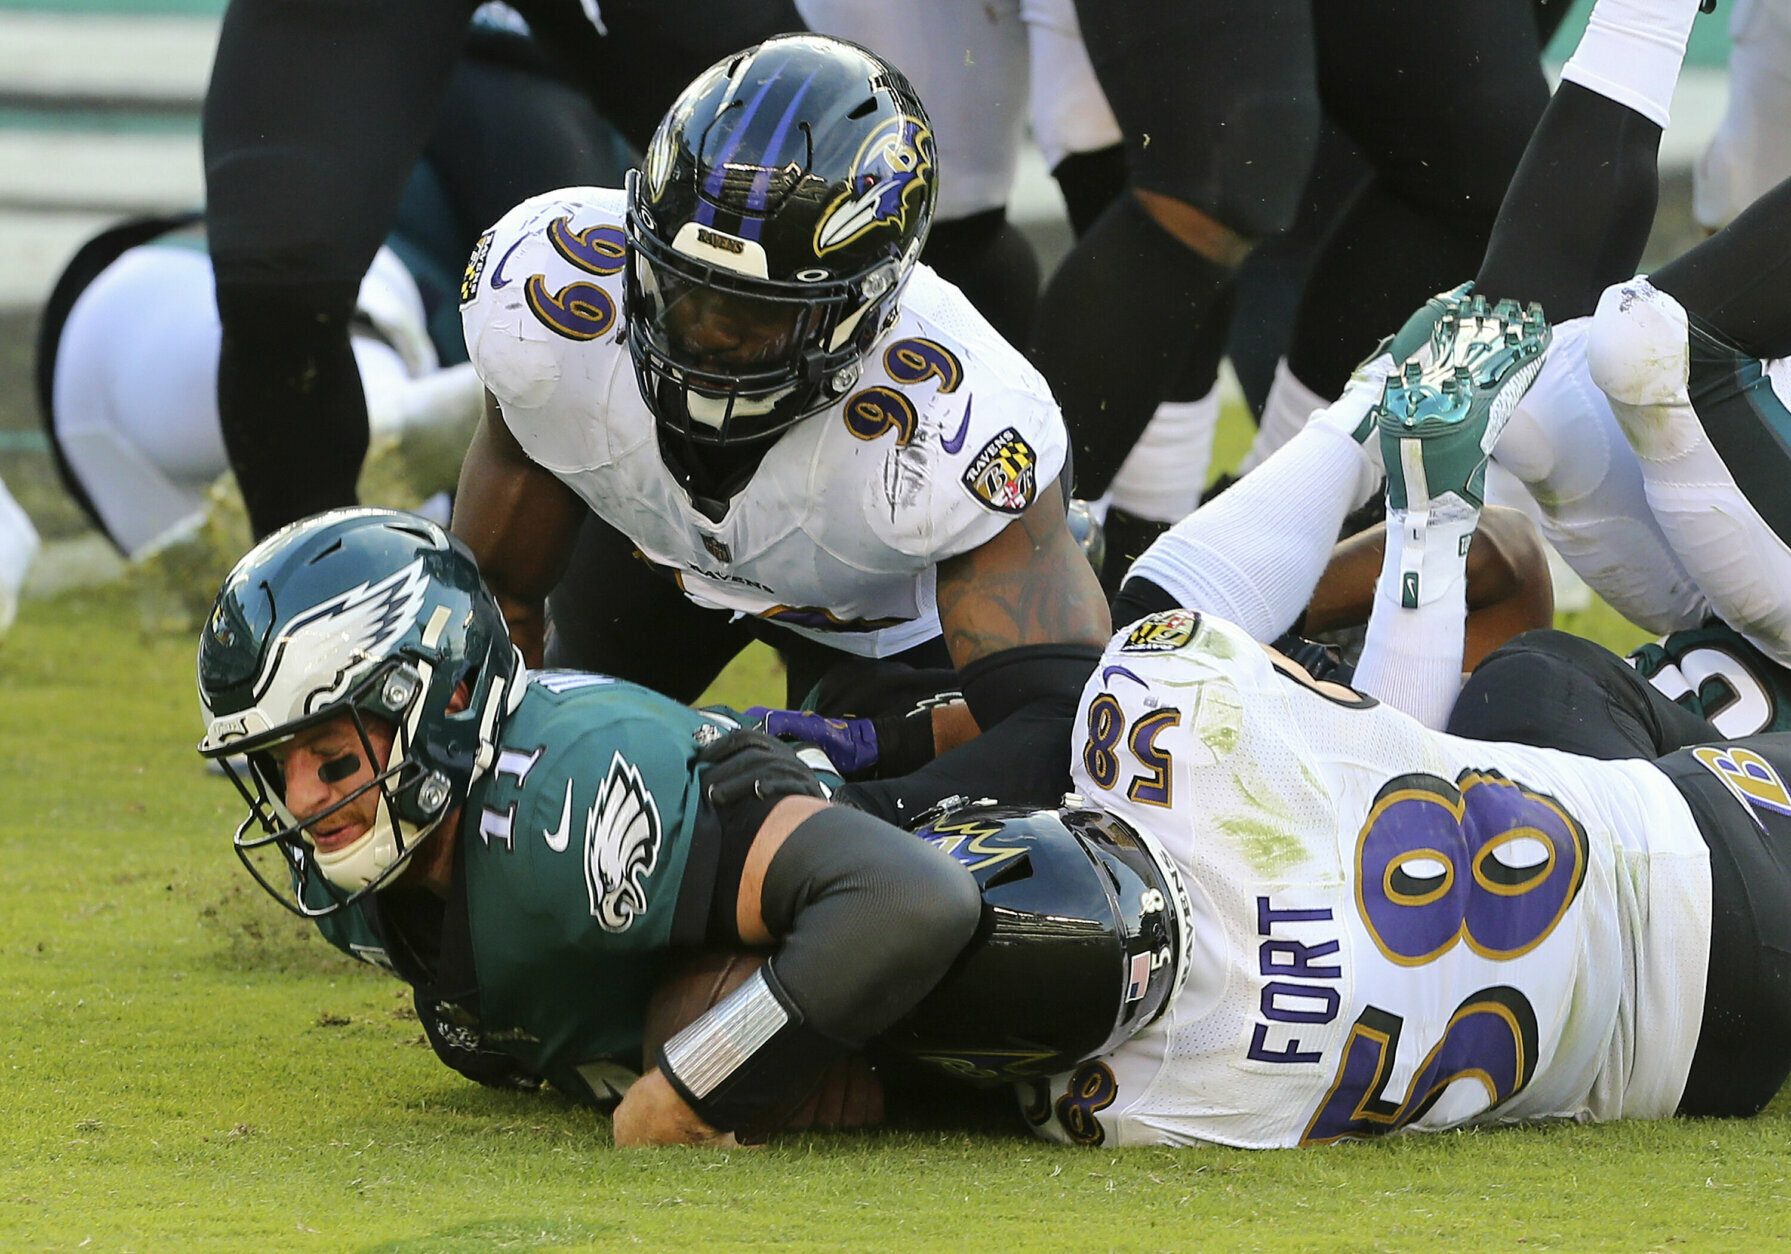 <p><b><i>Ravens 30</i></b><br />
<b><i>Eagles 28</i></b></p>
<p>Philadelphia is desperate and <a href="https://twitter.com/FilmstudyRavens/status/1317539183829917696?s=20 ">Baltimore struggles against the run without Brandon Williams</a>, so maybe the Eagles&#8217; comeback shouldn&#8217;t be a total surprise. Regardless, the Ravens&#8217; streak of 29 straight games scoring 20+ points is tied with &#8220;The Greatest Show on Turf&#8221; Rams for the second longest such streak in NFL history, and their 5-1 record puts them <a href="https://twitter.com/RobWoodfork/status/1317974541944164353?s=20">on pace to meet my lofty expectations</a>. Count on a playoff atmosphere when the Steelers come to Charm City in two weeks.</p>
